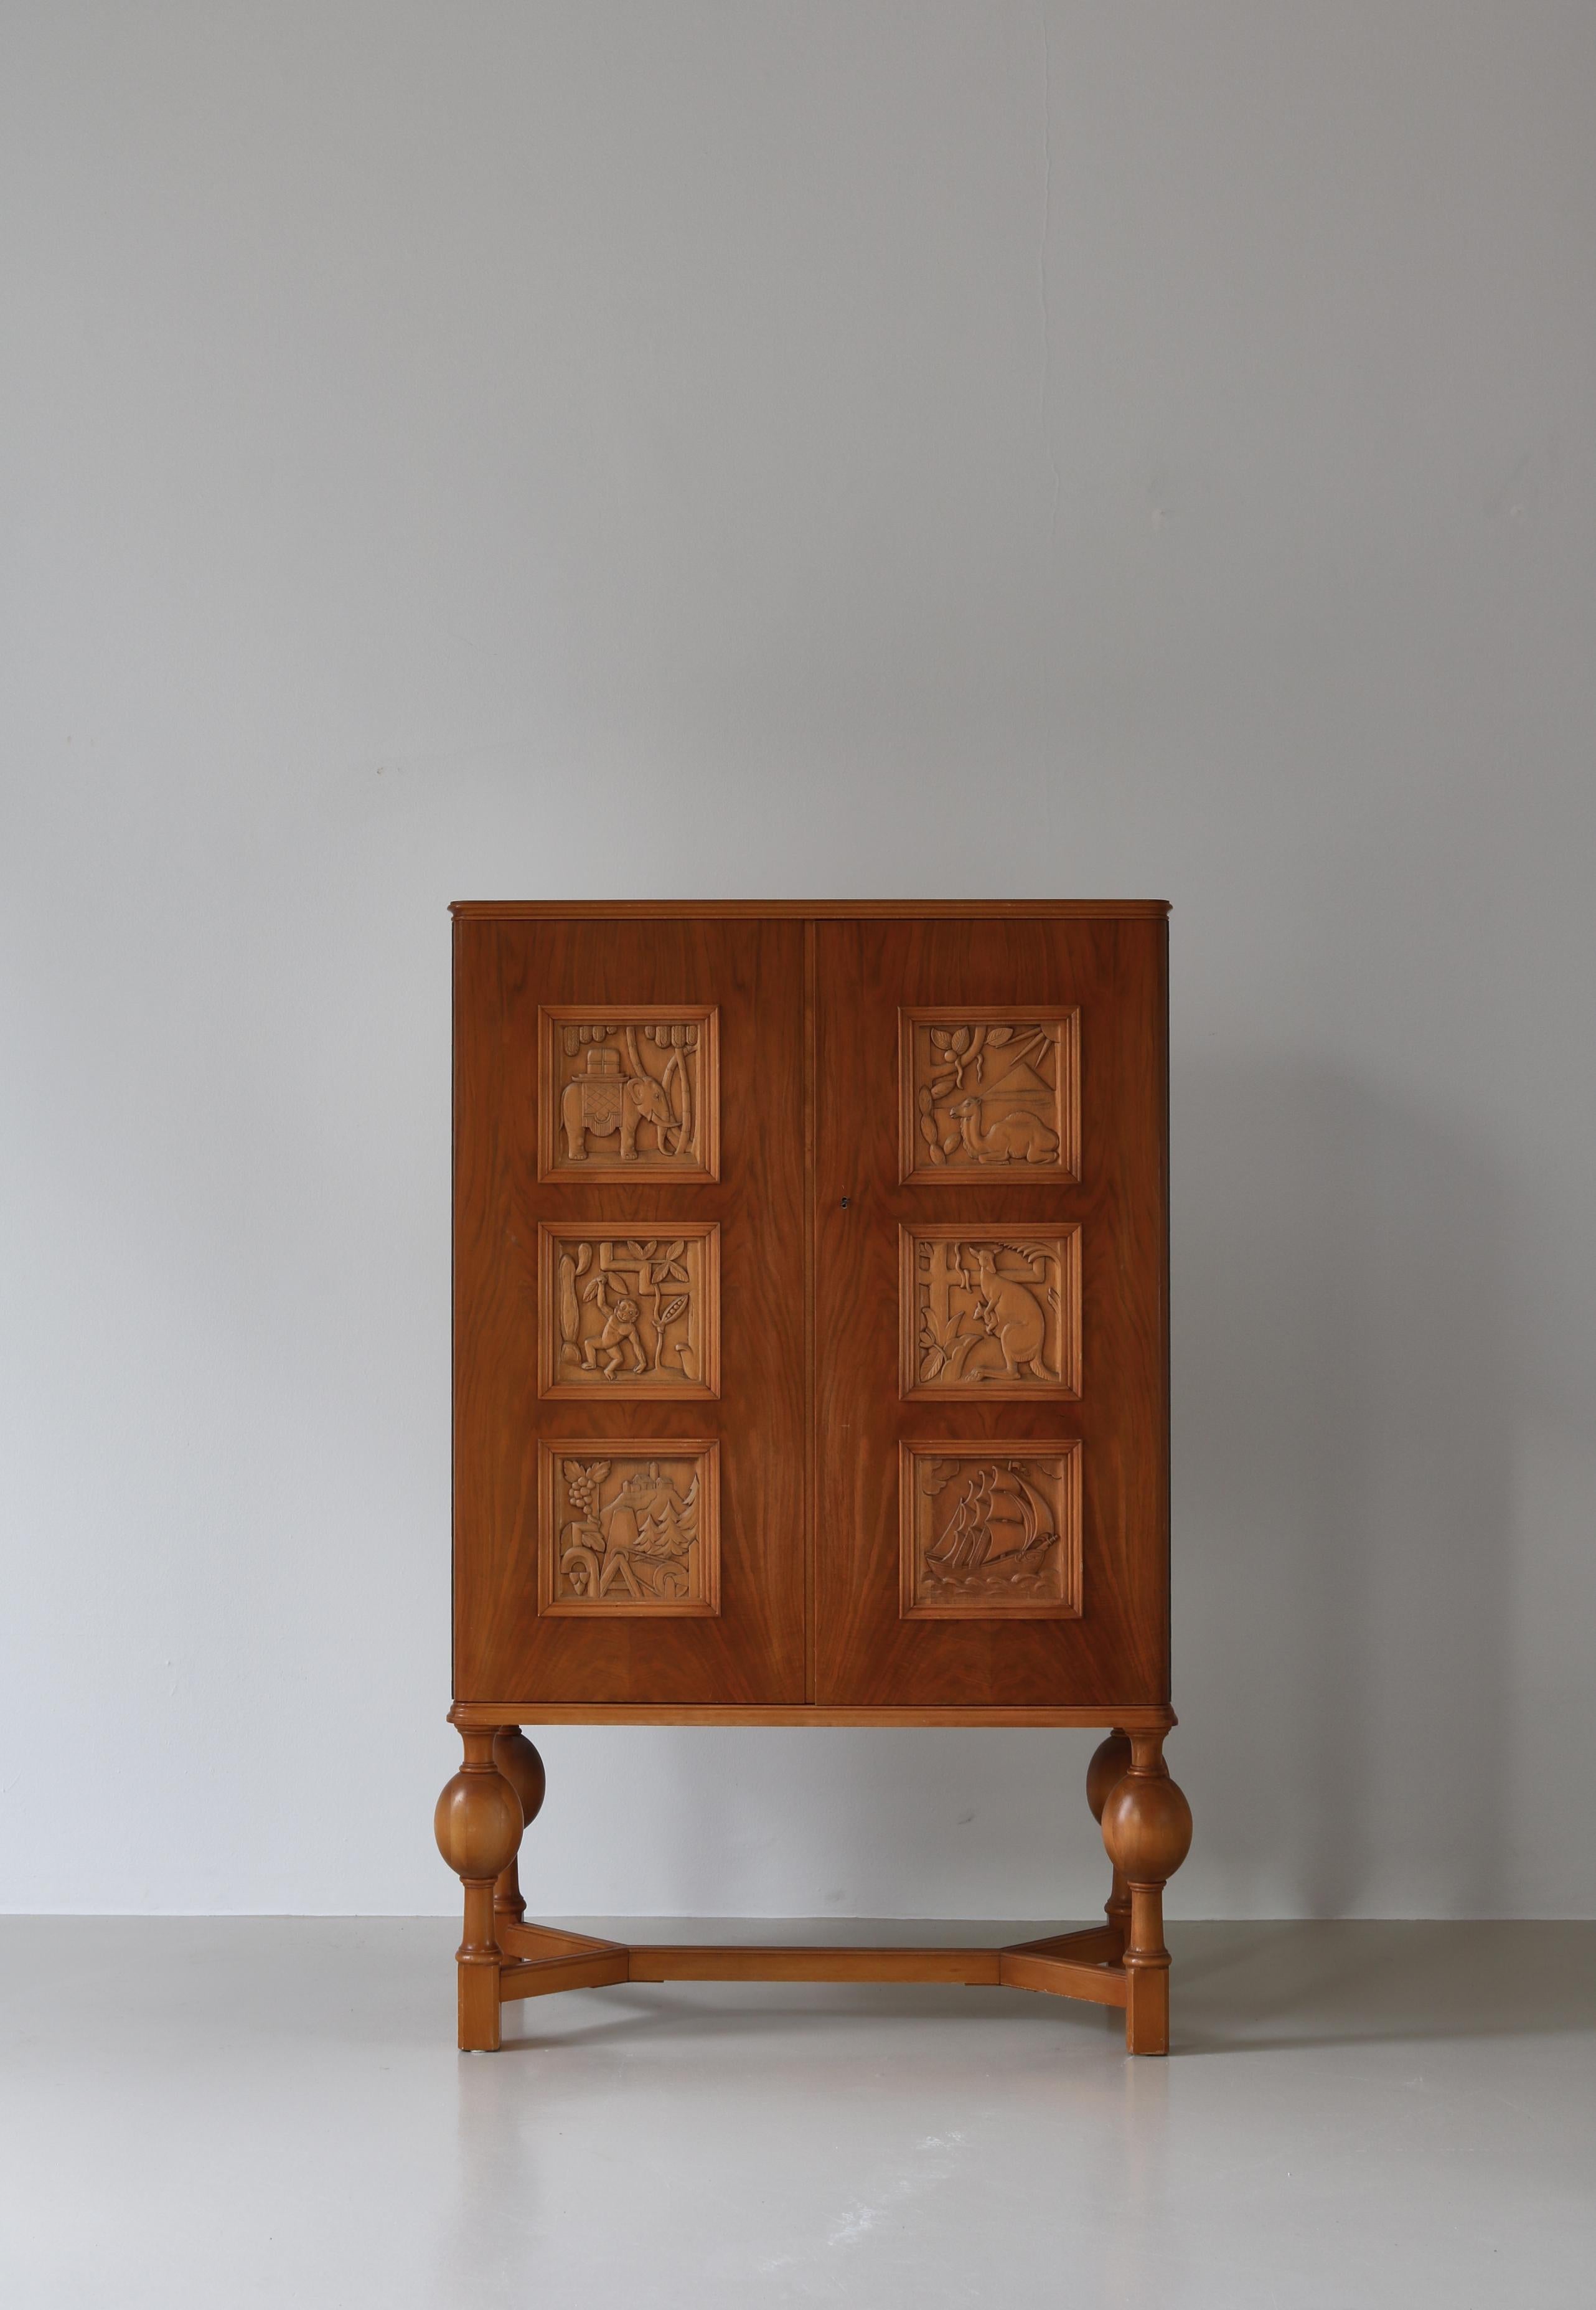 Swedish Grace Cabinet with Carved Decor by Eugen Höglund, Vetlanda, Sweden, 1930 In Fair Condition For Sale In Odense, DK